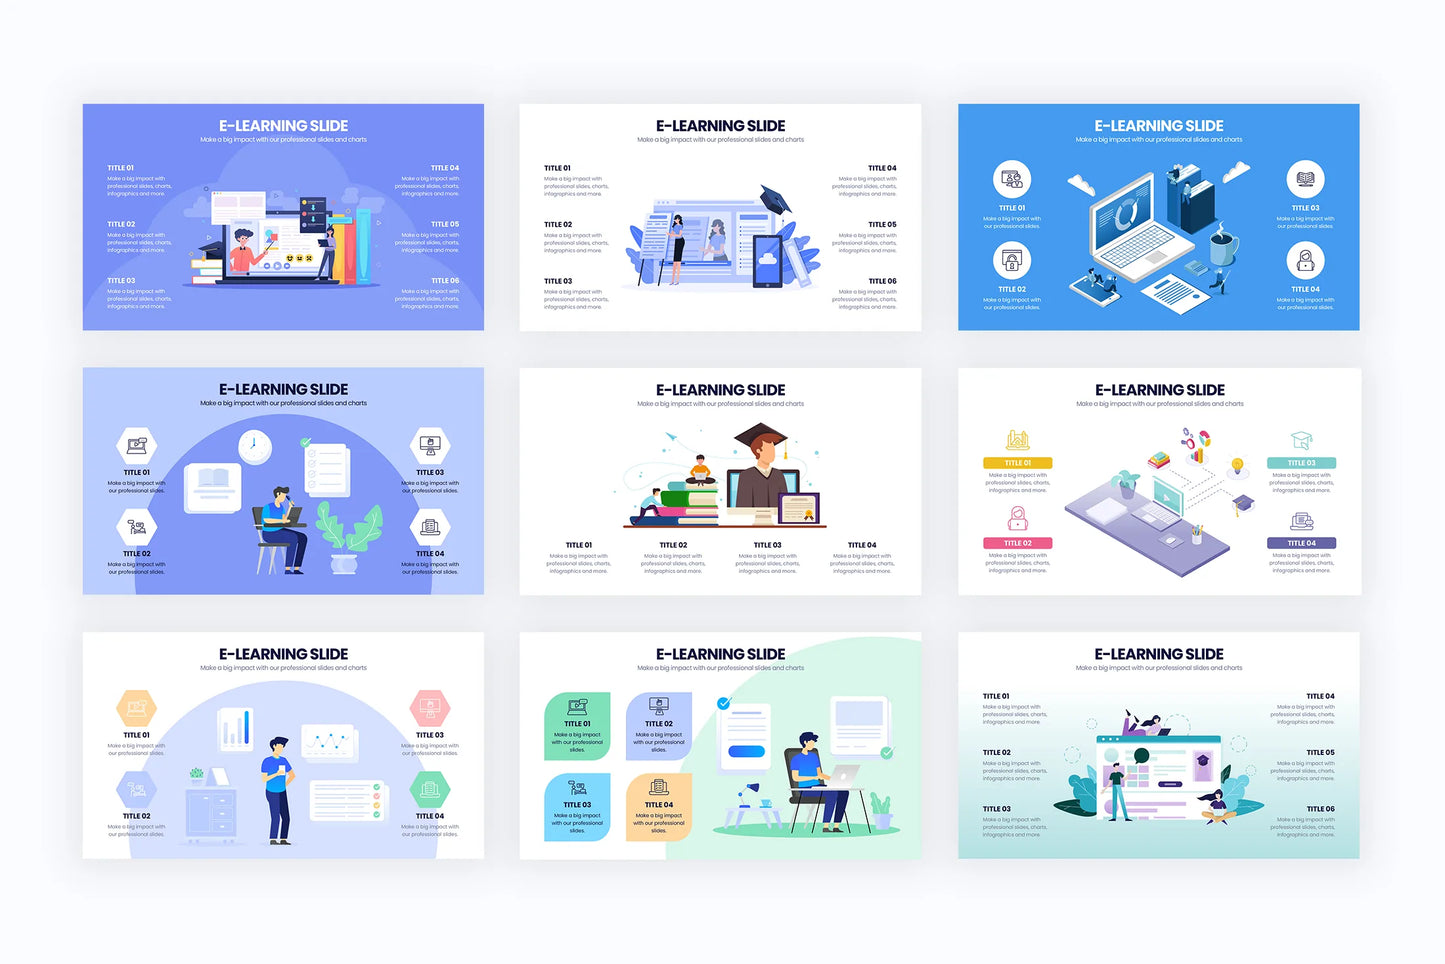 E Learning Infographic templates